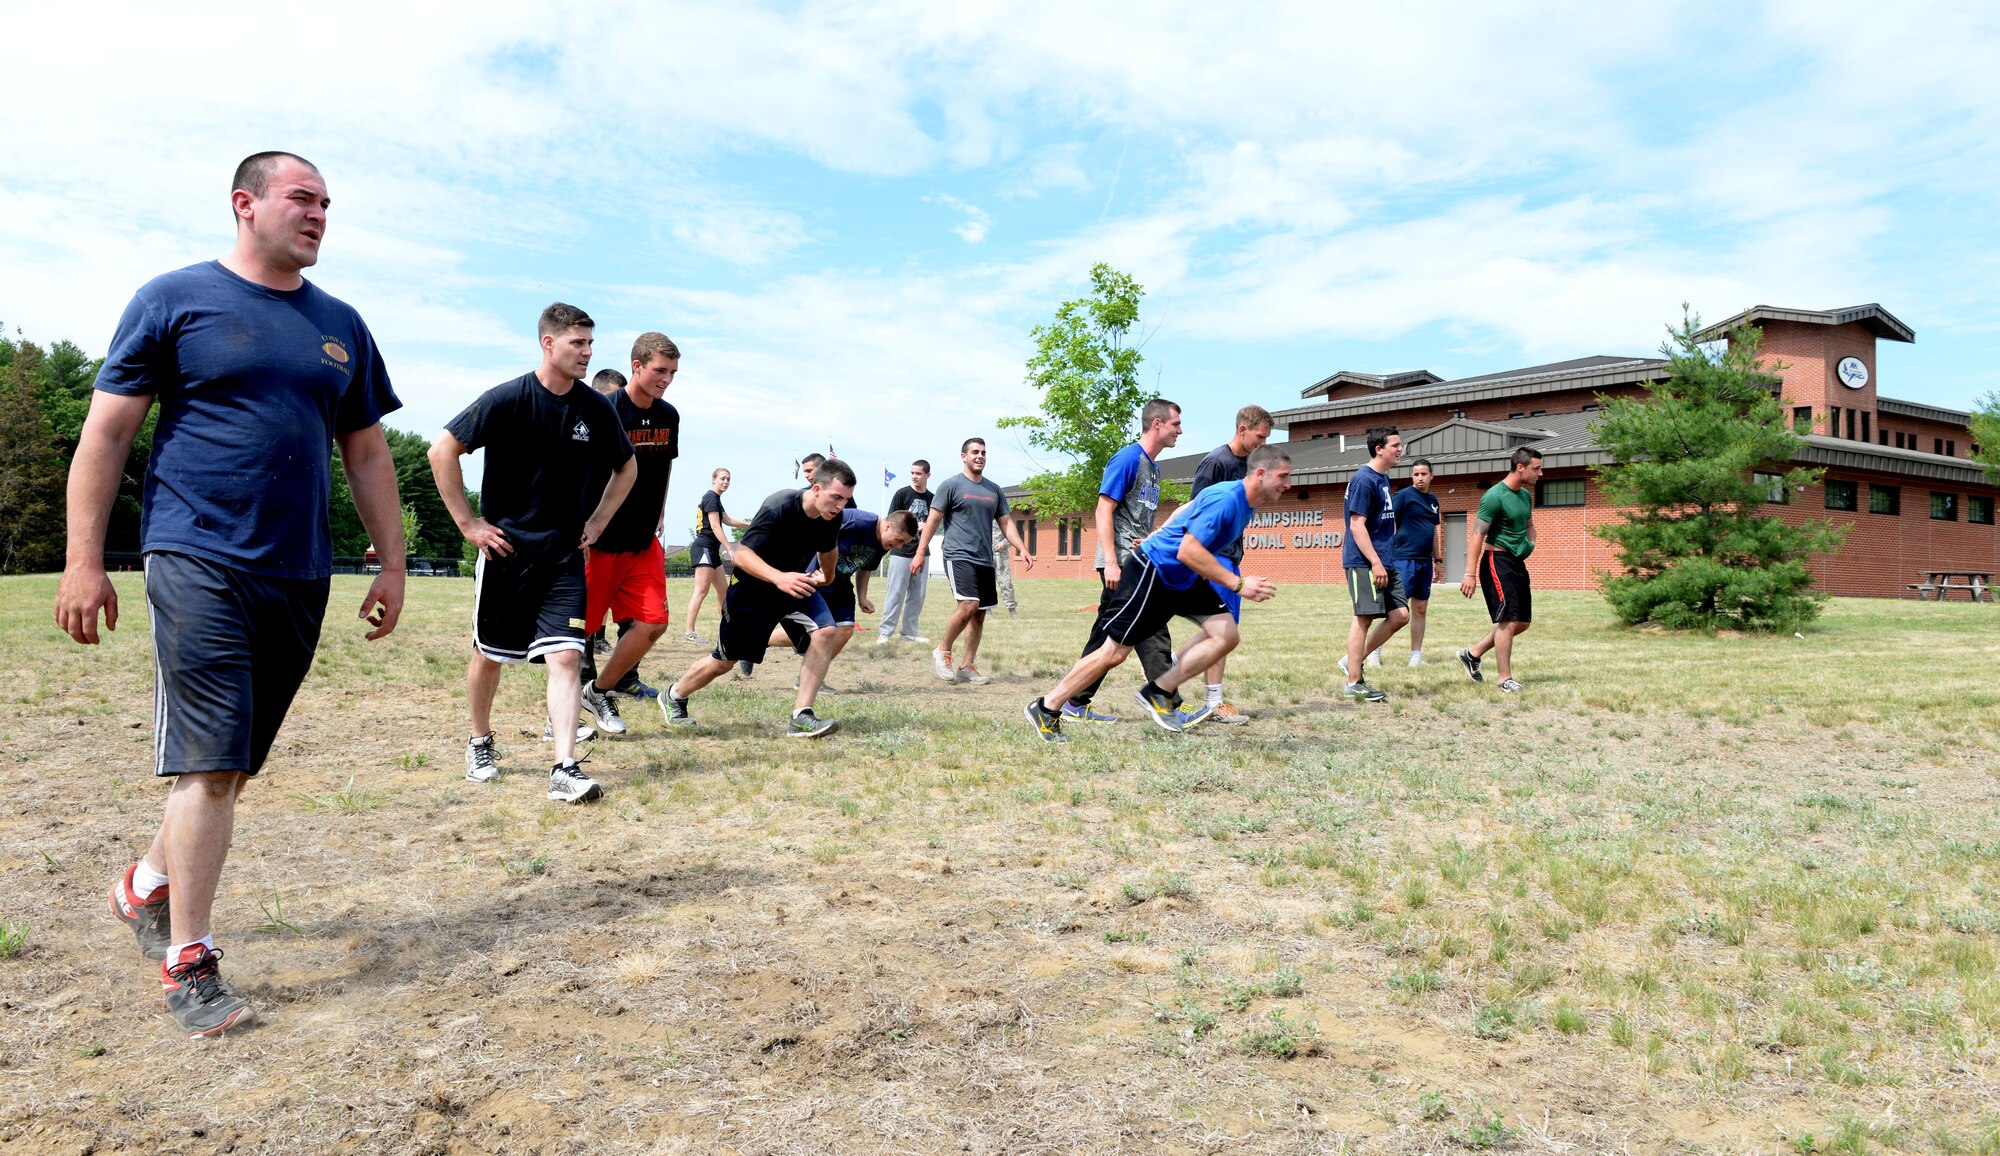 Members of the 157th Air Refueling Wing Student Flight battle it out in a game of capture the flag during physical training June 14, 2015 at Pease Air National Guard Base, N.H. Student Flight prepares new members of the New Hampshire Air National Guard for Basic Military Training and technical school. (N.H. Air National Guard photo by Staff Sgt. Curtis J. Lenz/ RELEASED)